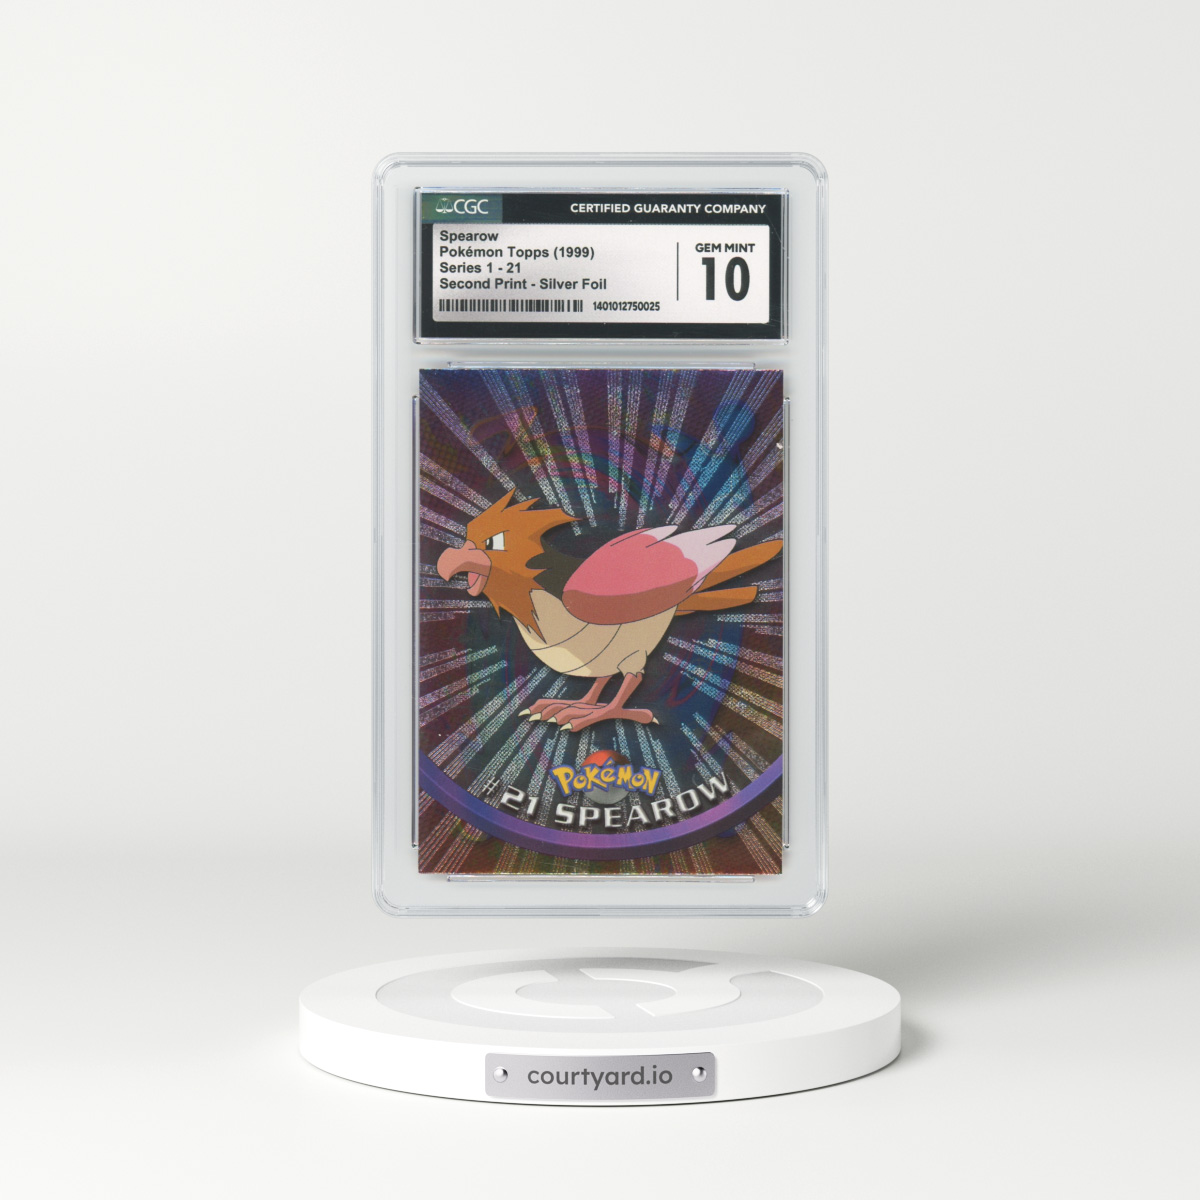 1999 Topps Series 1 #21 Spearow - Holo Second Print - Silver Foil (CGC 10 GEM MINT)